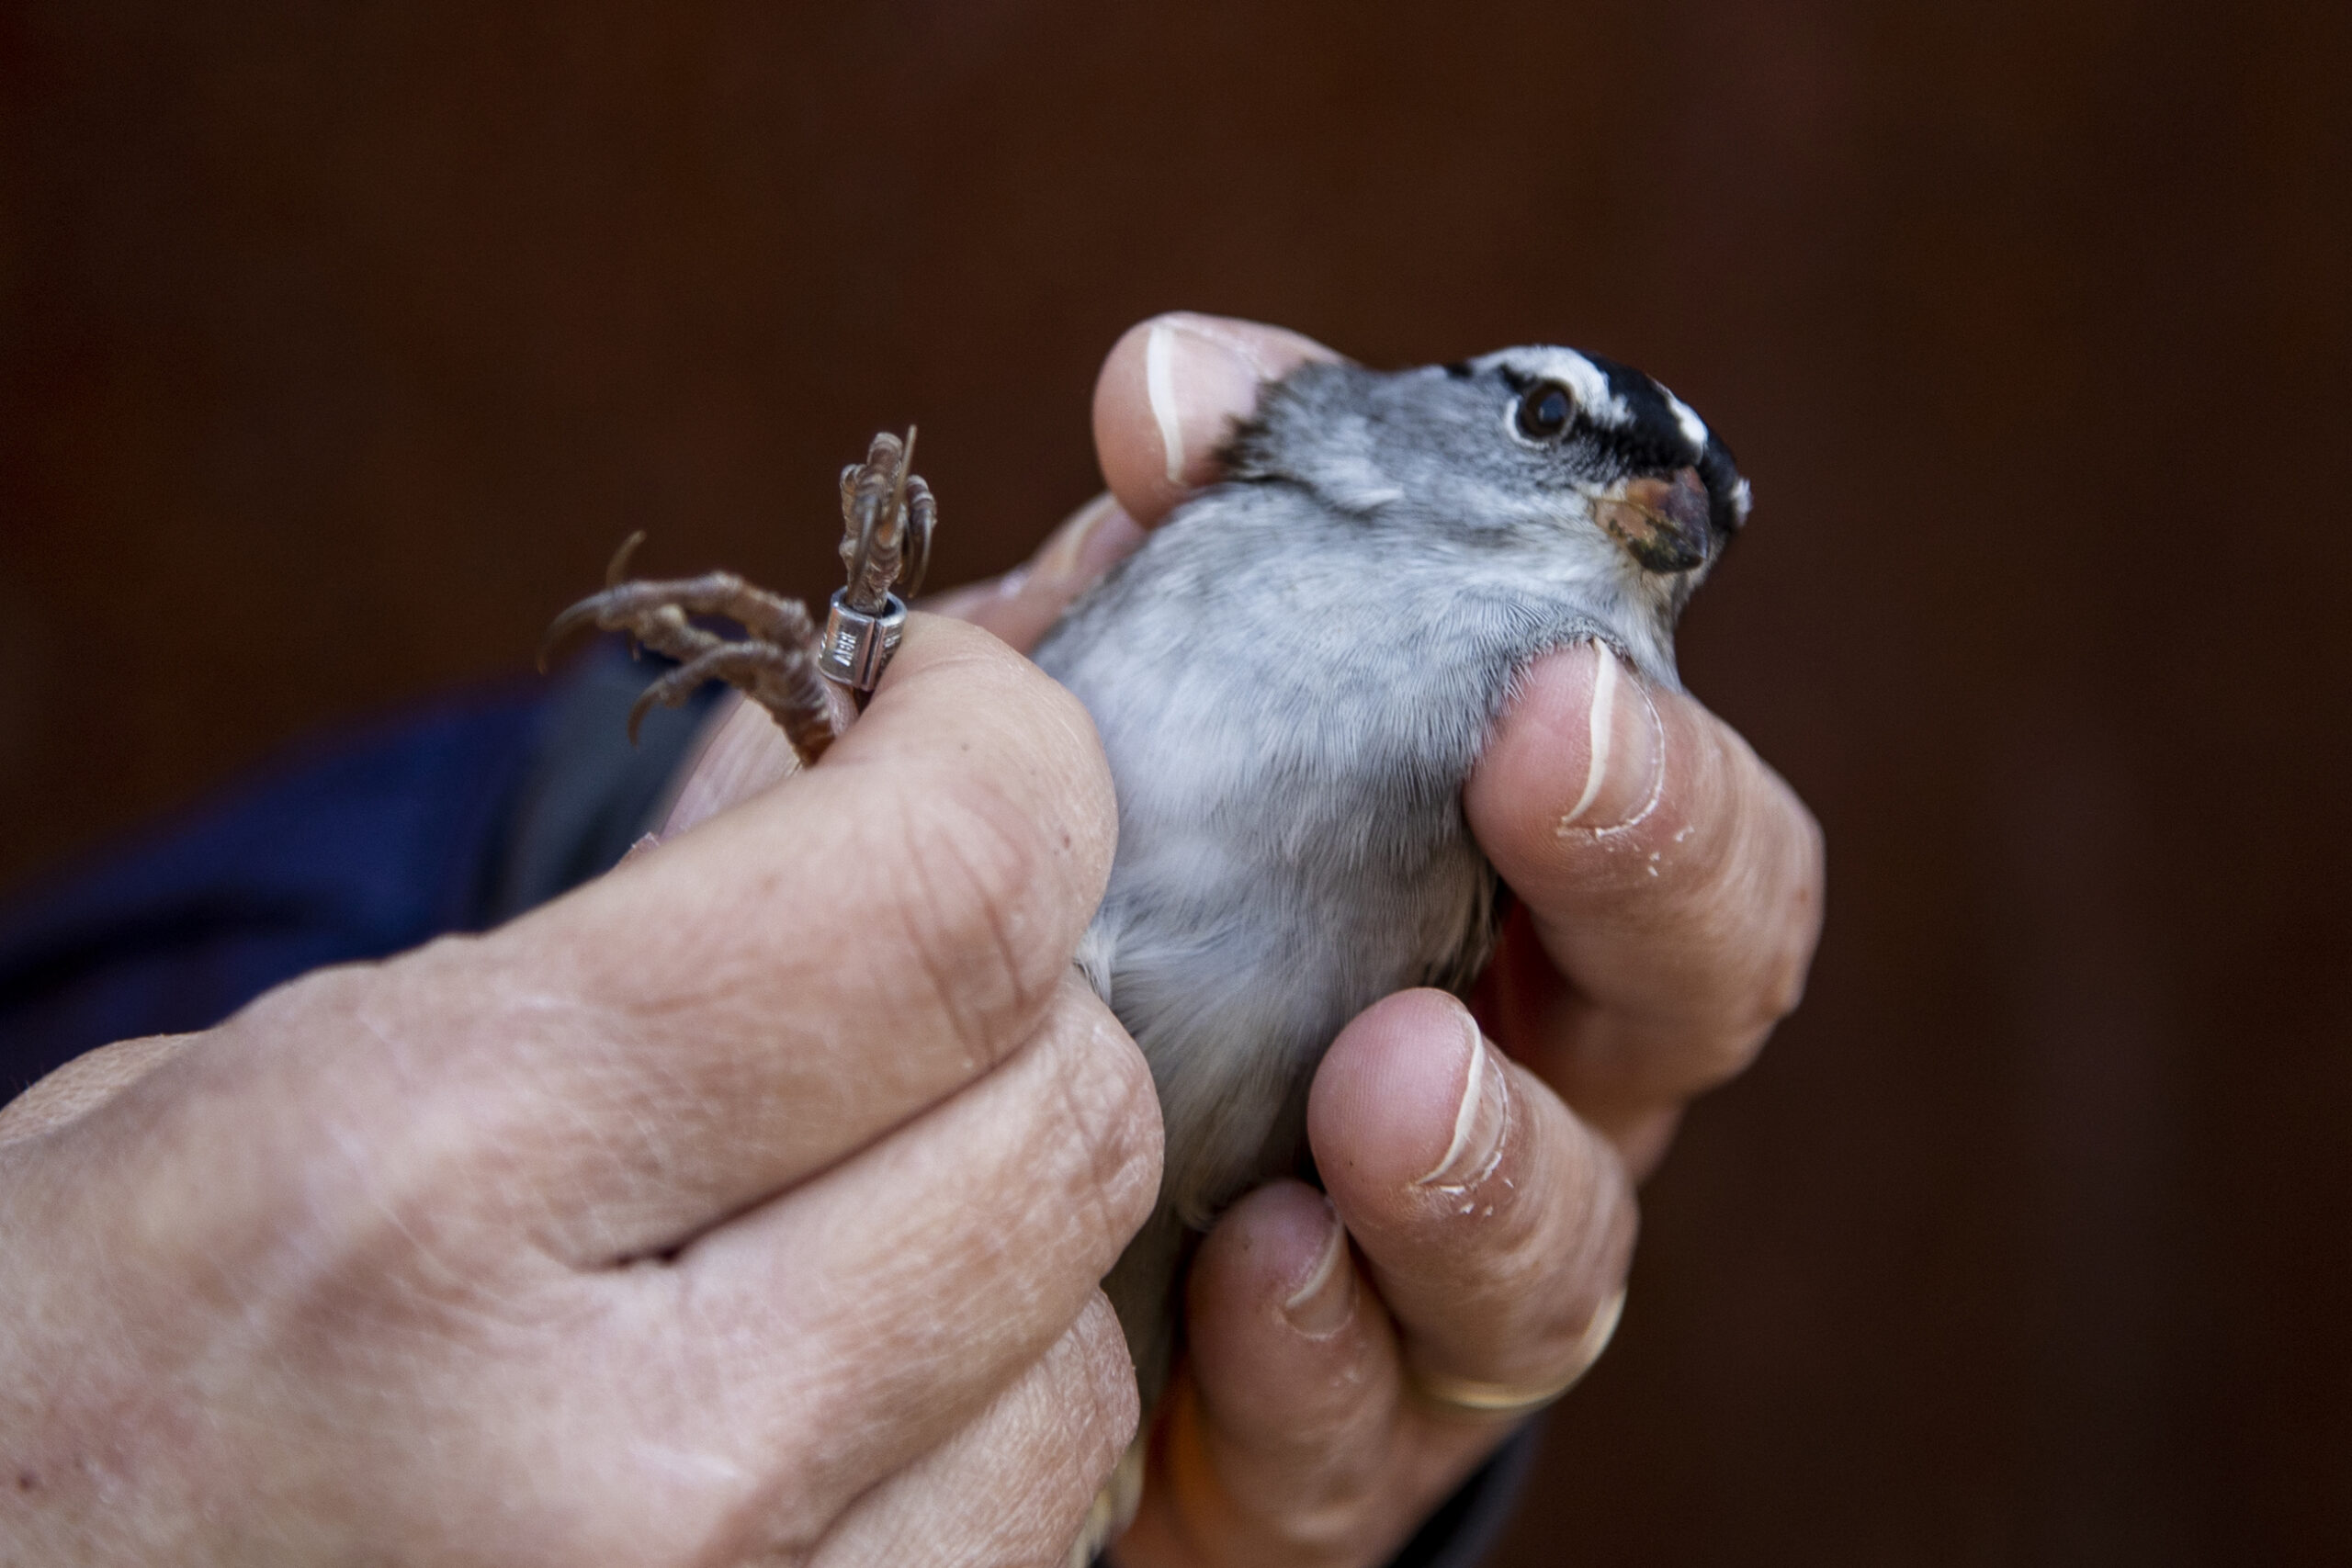 A sparrow with black and white streaks on its head is held in two hands and looks at the camera, a bird tag visible on its leg